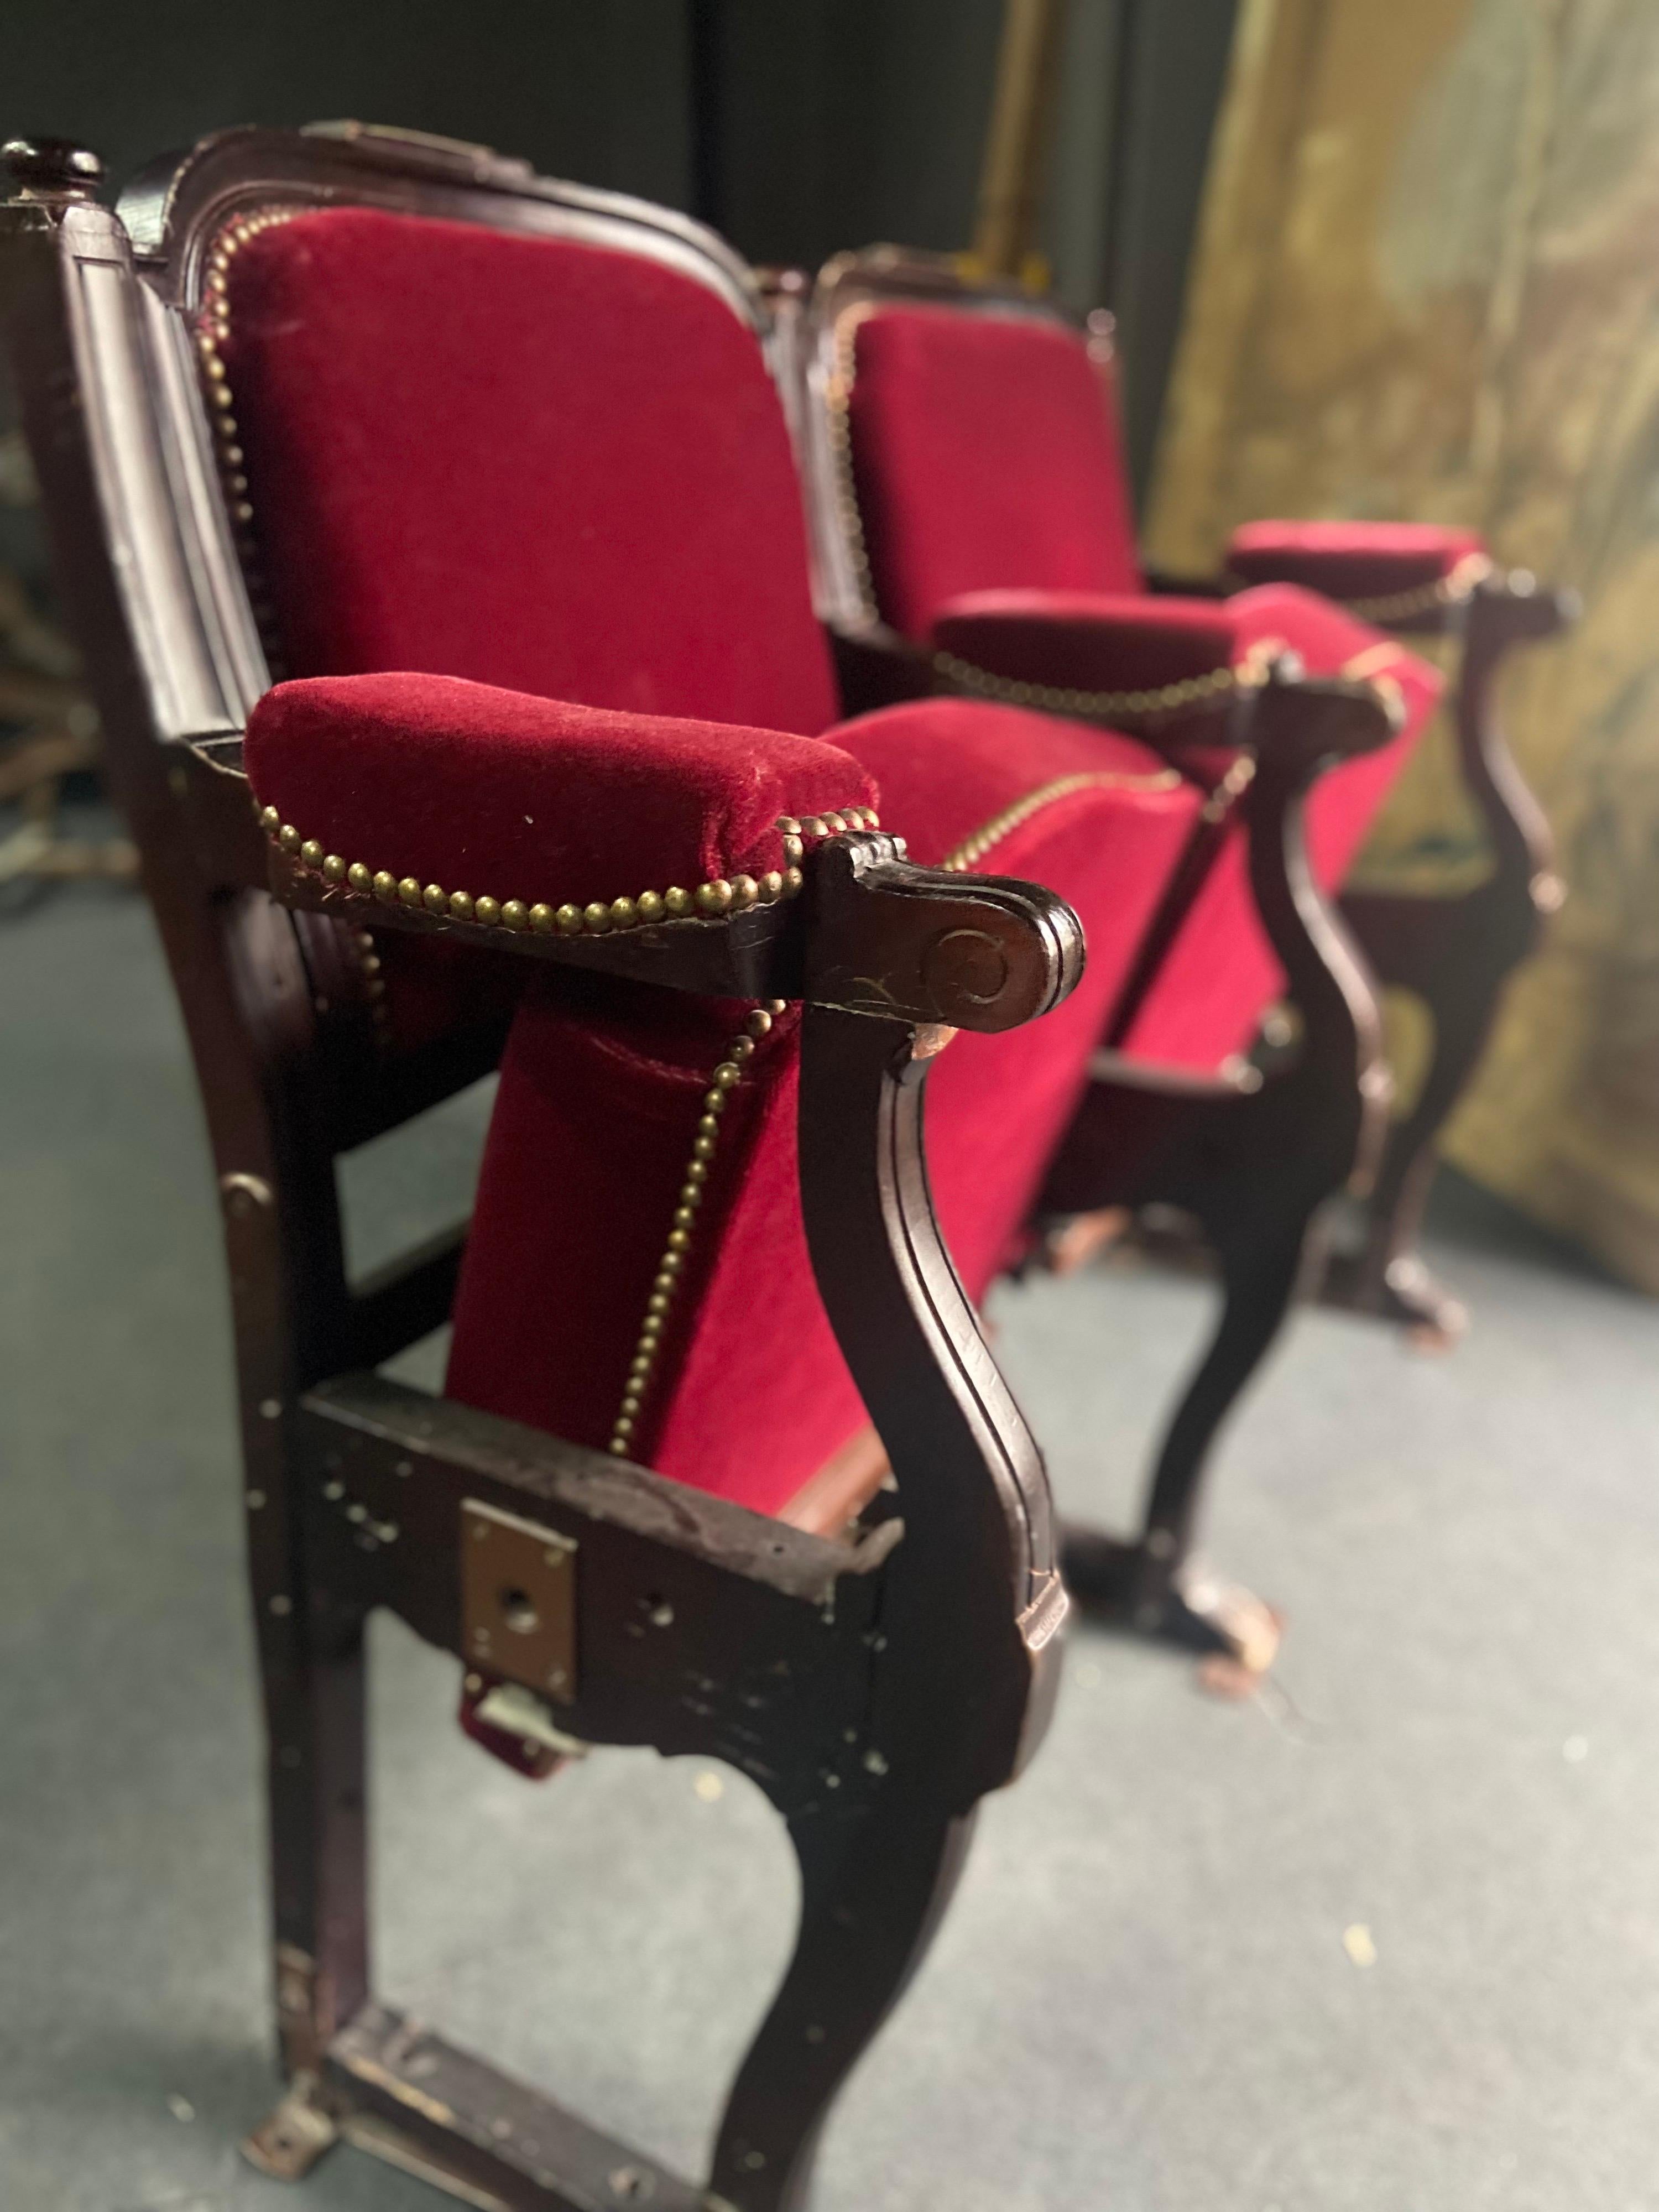 Two-seat theater seats in wood and metal with tilting seats, upholstered in red velvet. Measures: Width 116 cm
France, circa 1920.